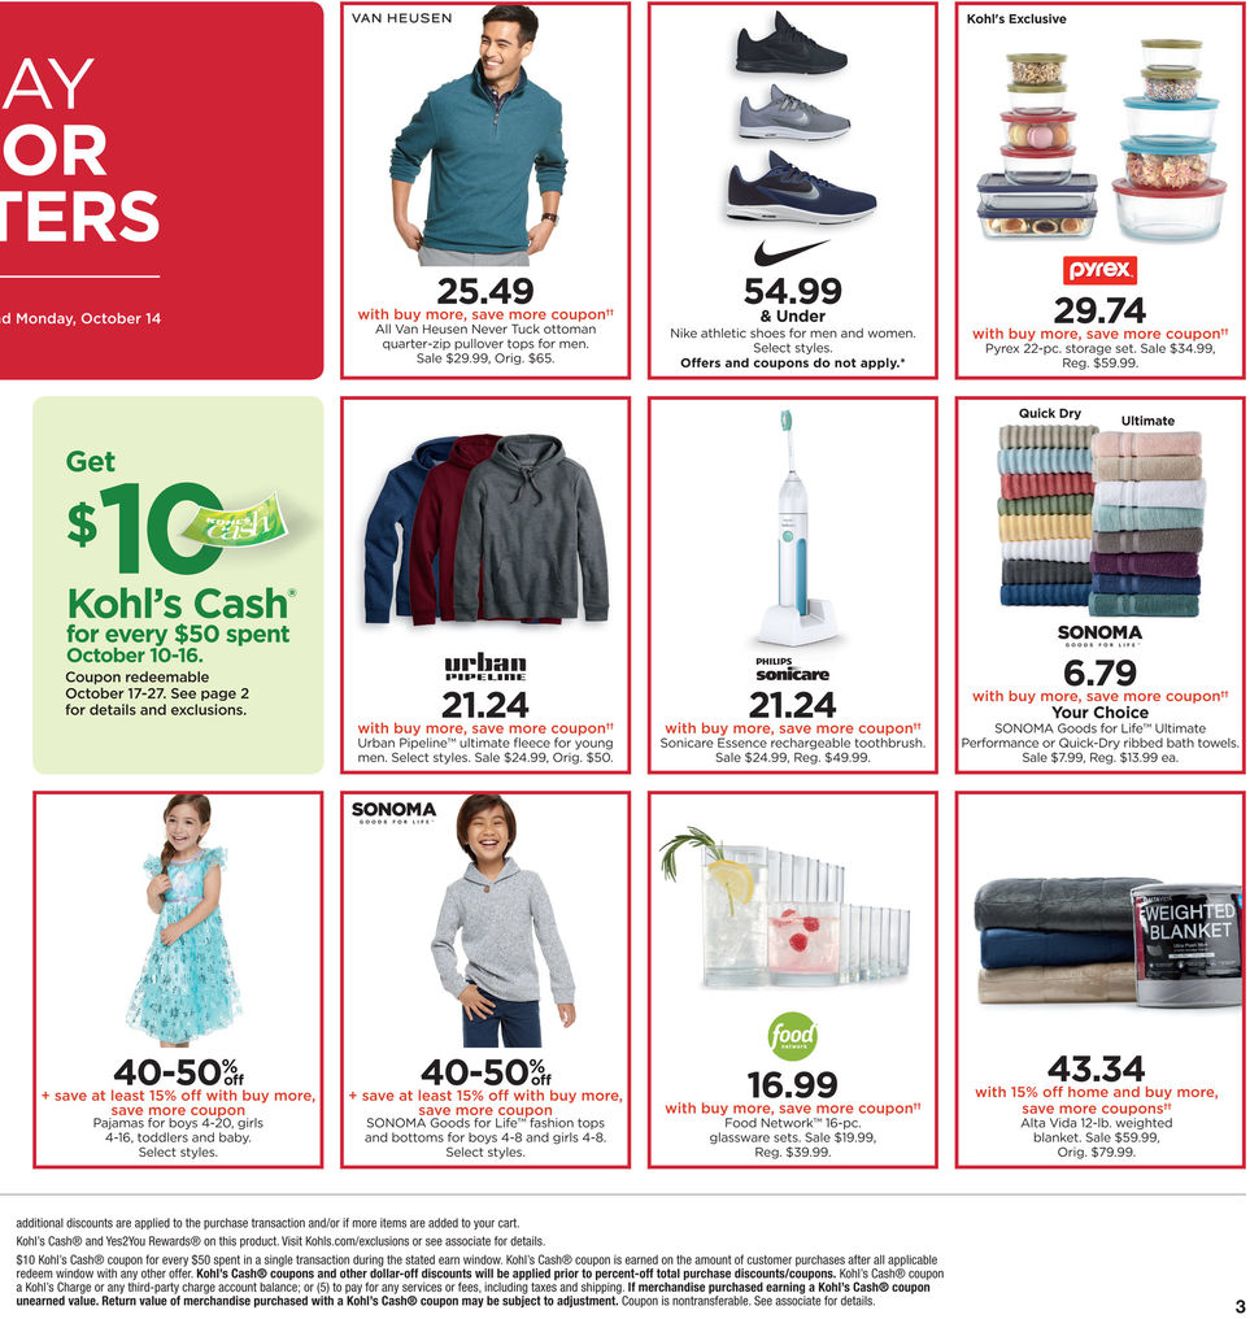 Kohl's Current weekly ad 10/13 - 10/20/2019 [3] - frequent-ads.com